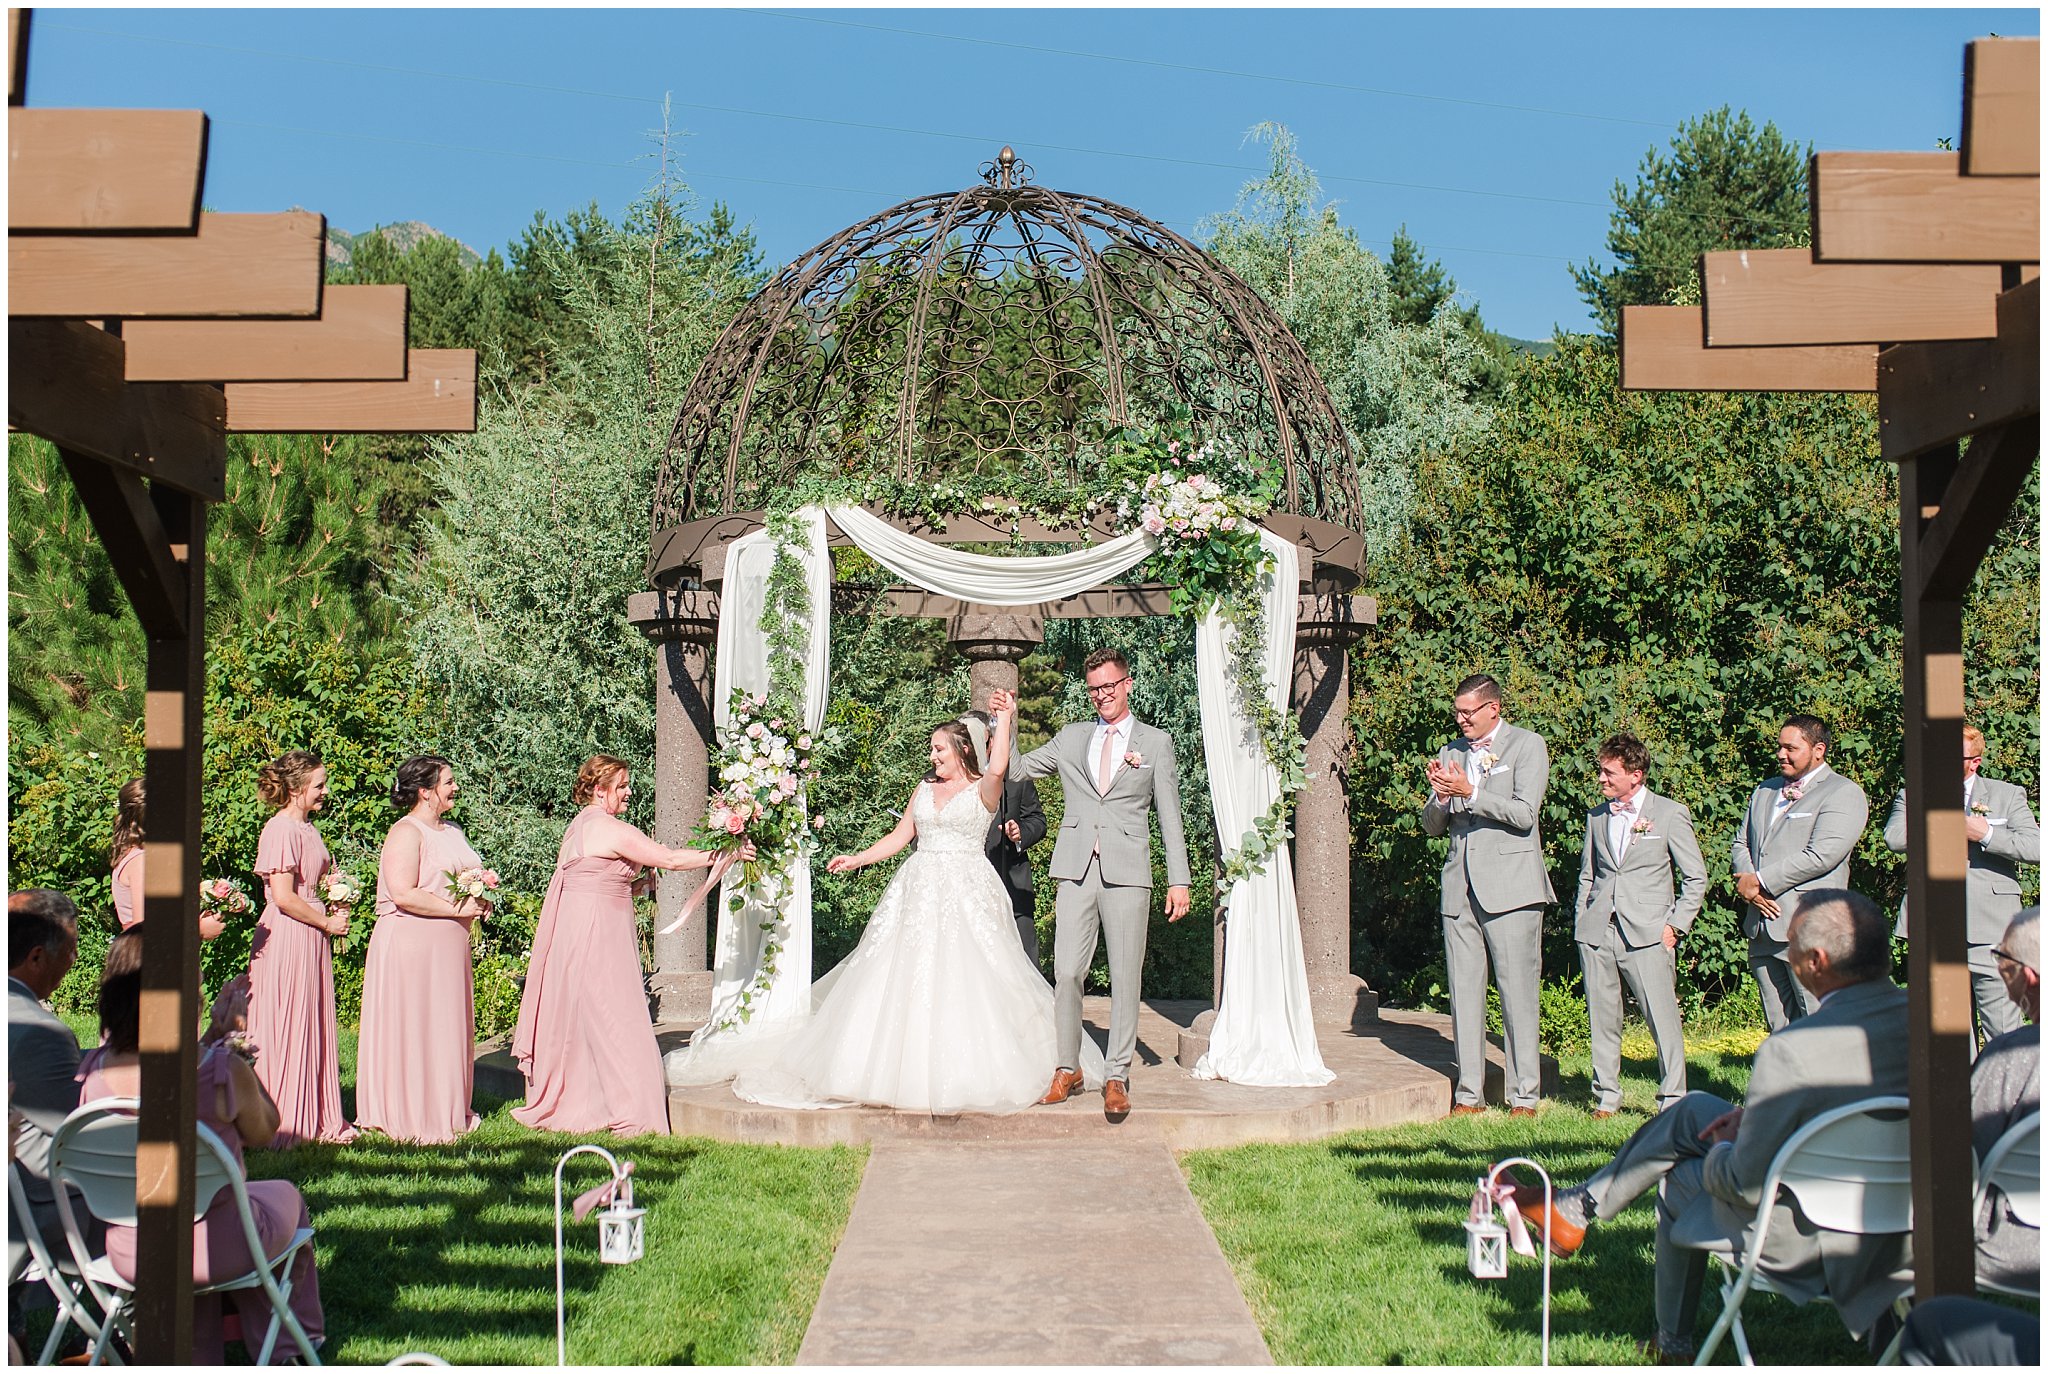 Celebration before recessional | Oak Hills Utah Dusty Rose and Gray Summer Wedding | Jessie and Dallin Photography